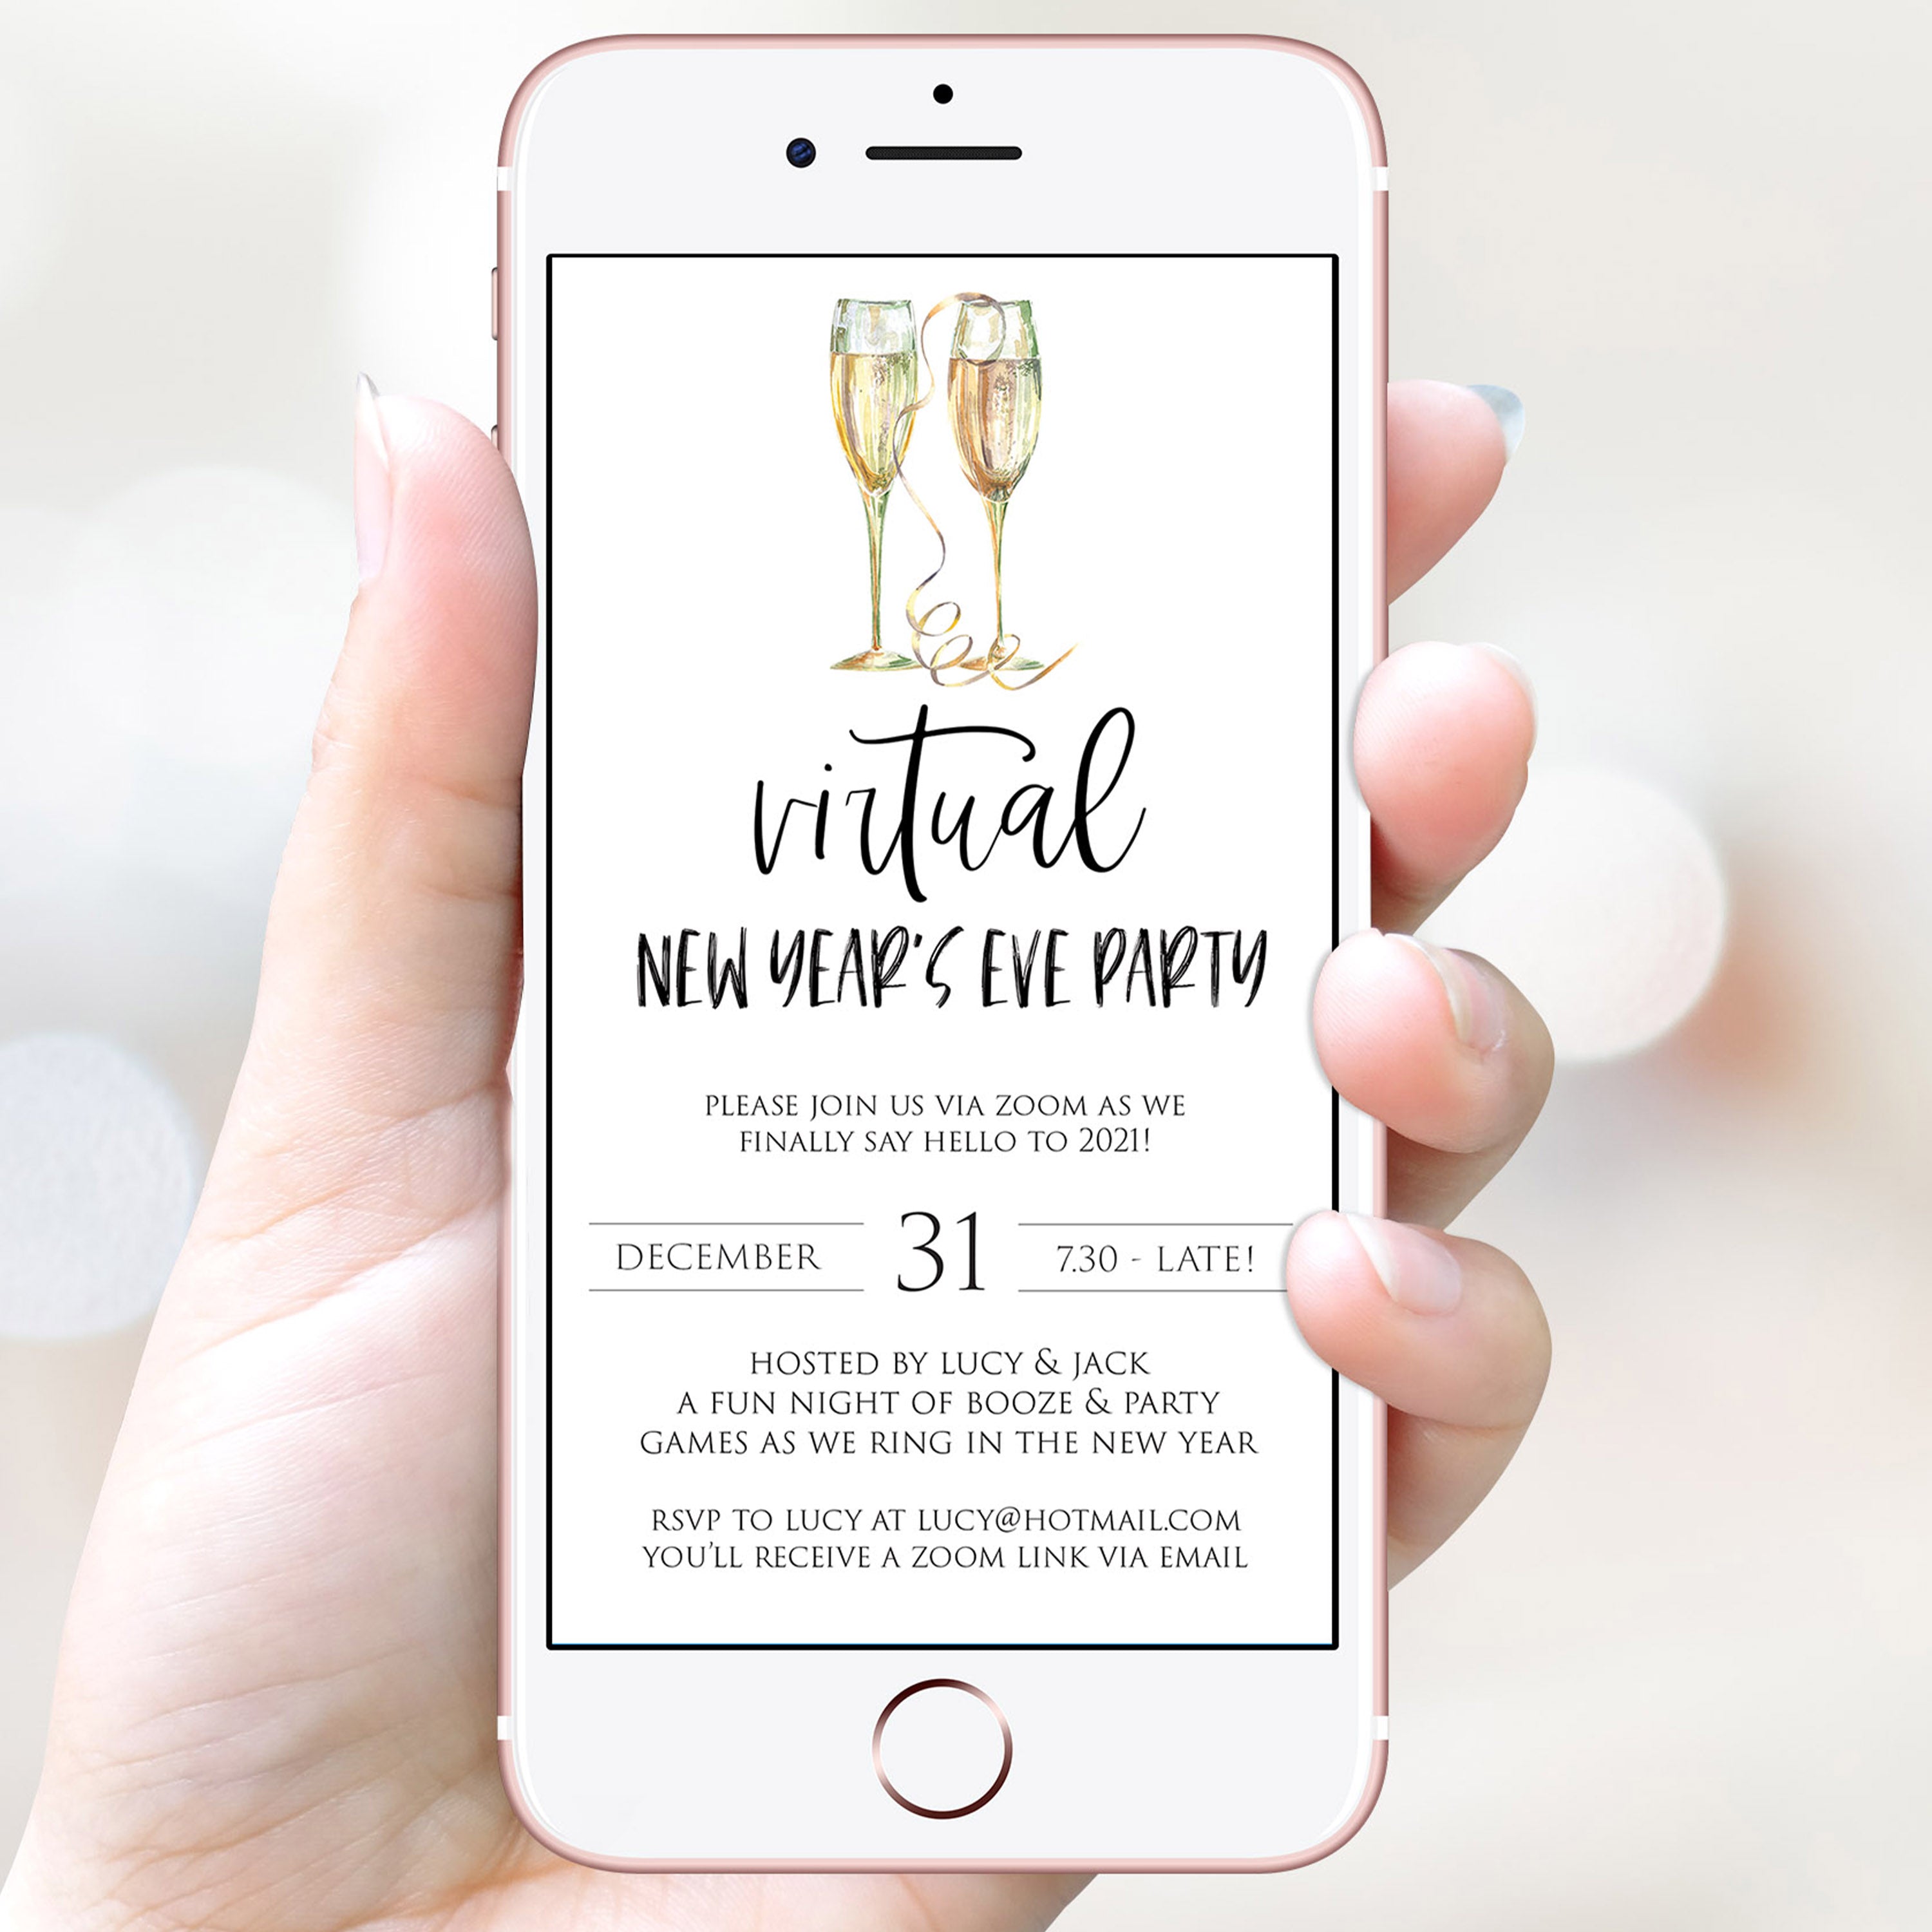 virtual new years eve party, new years eve party invitation, new years eve party ideas, party invitations, editable party invitations, gold new years eve invitation